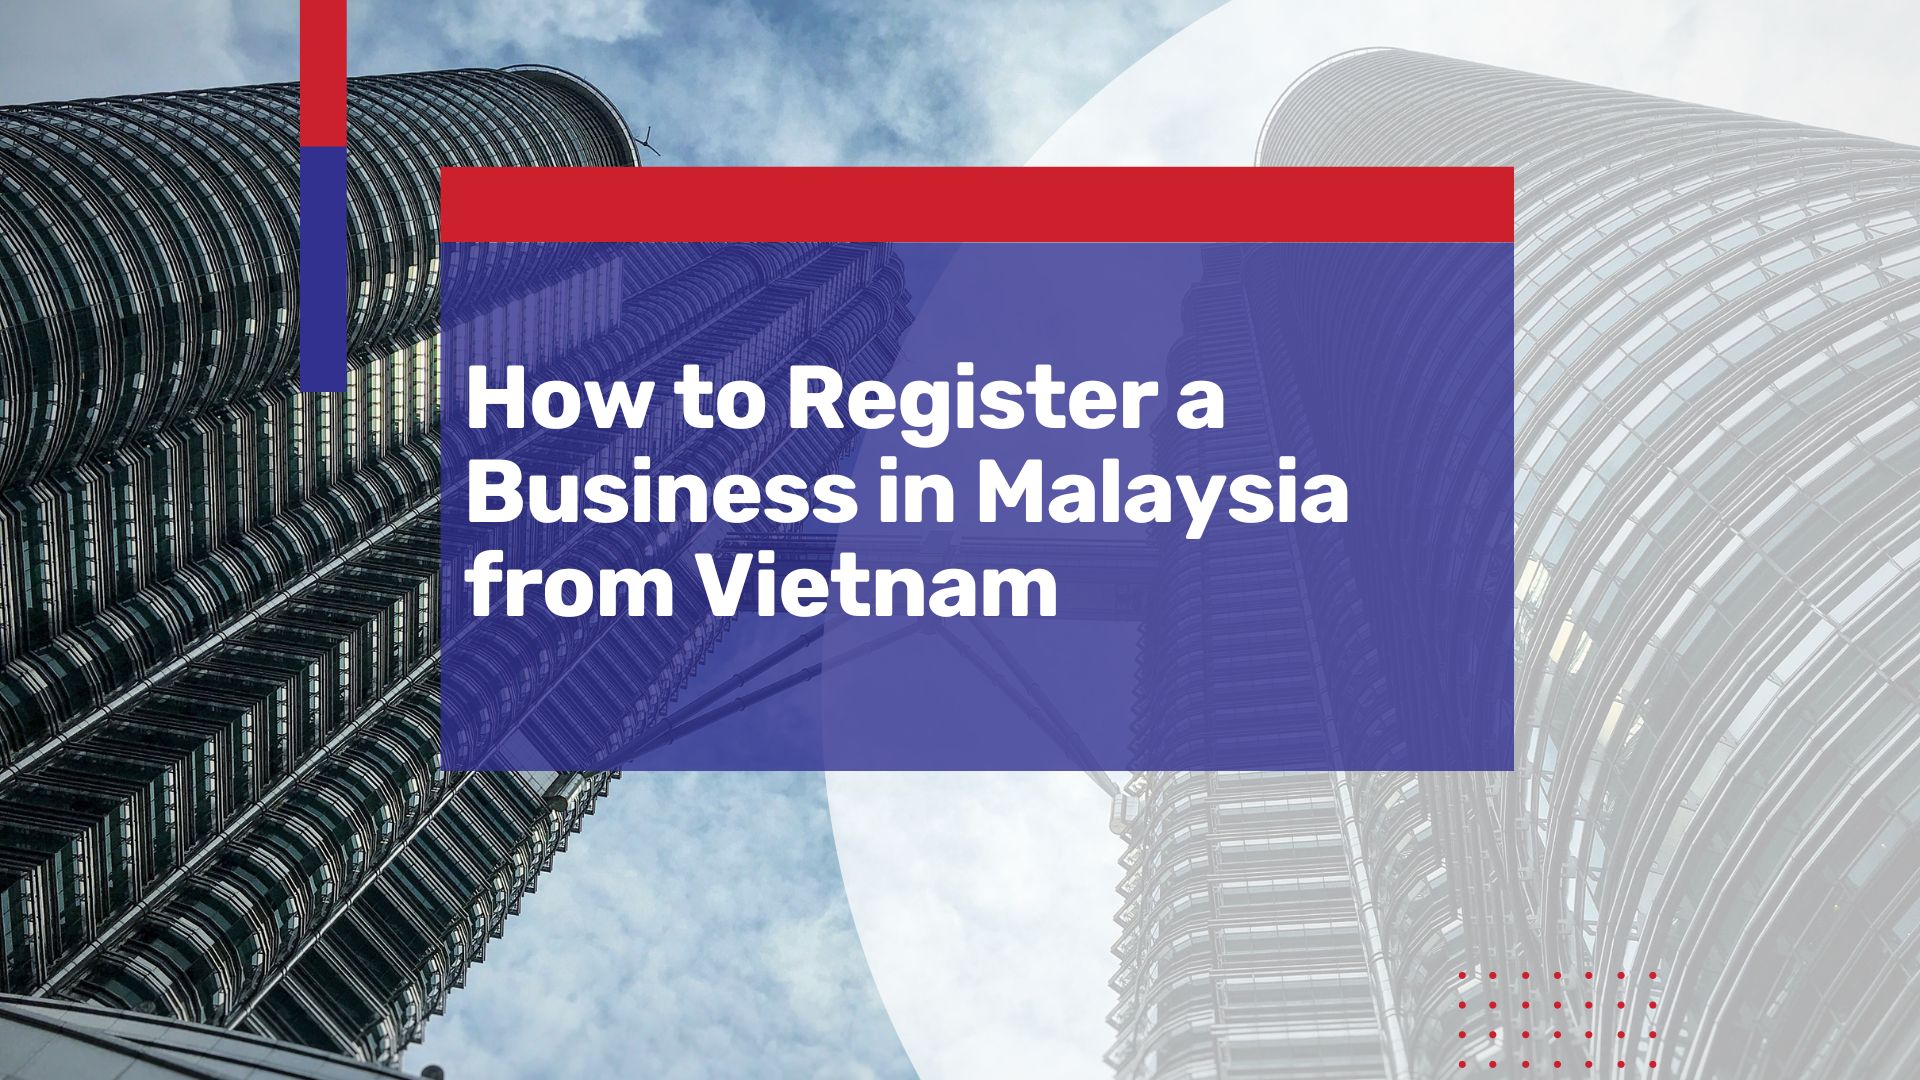 How to Register Your Business in Malaysia from Vietnam Efficiently